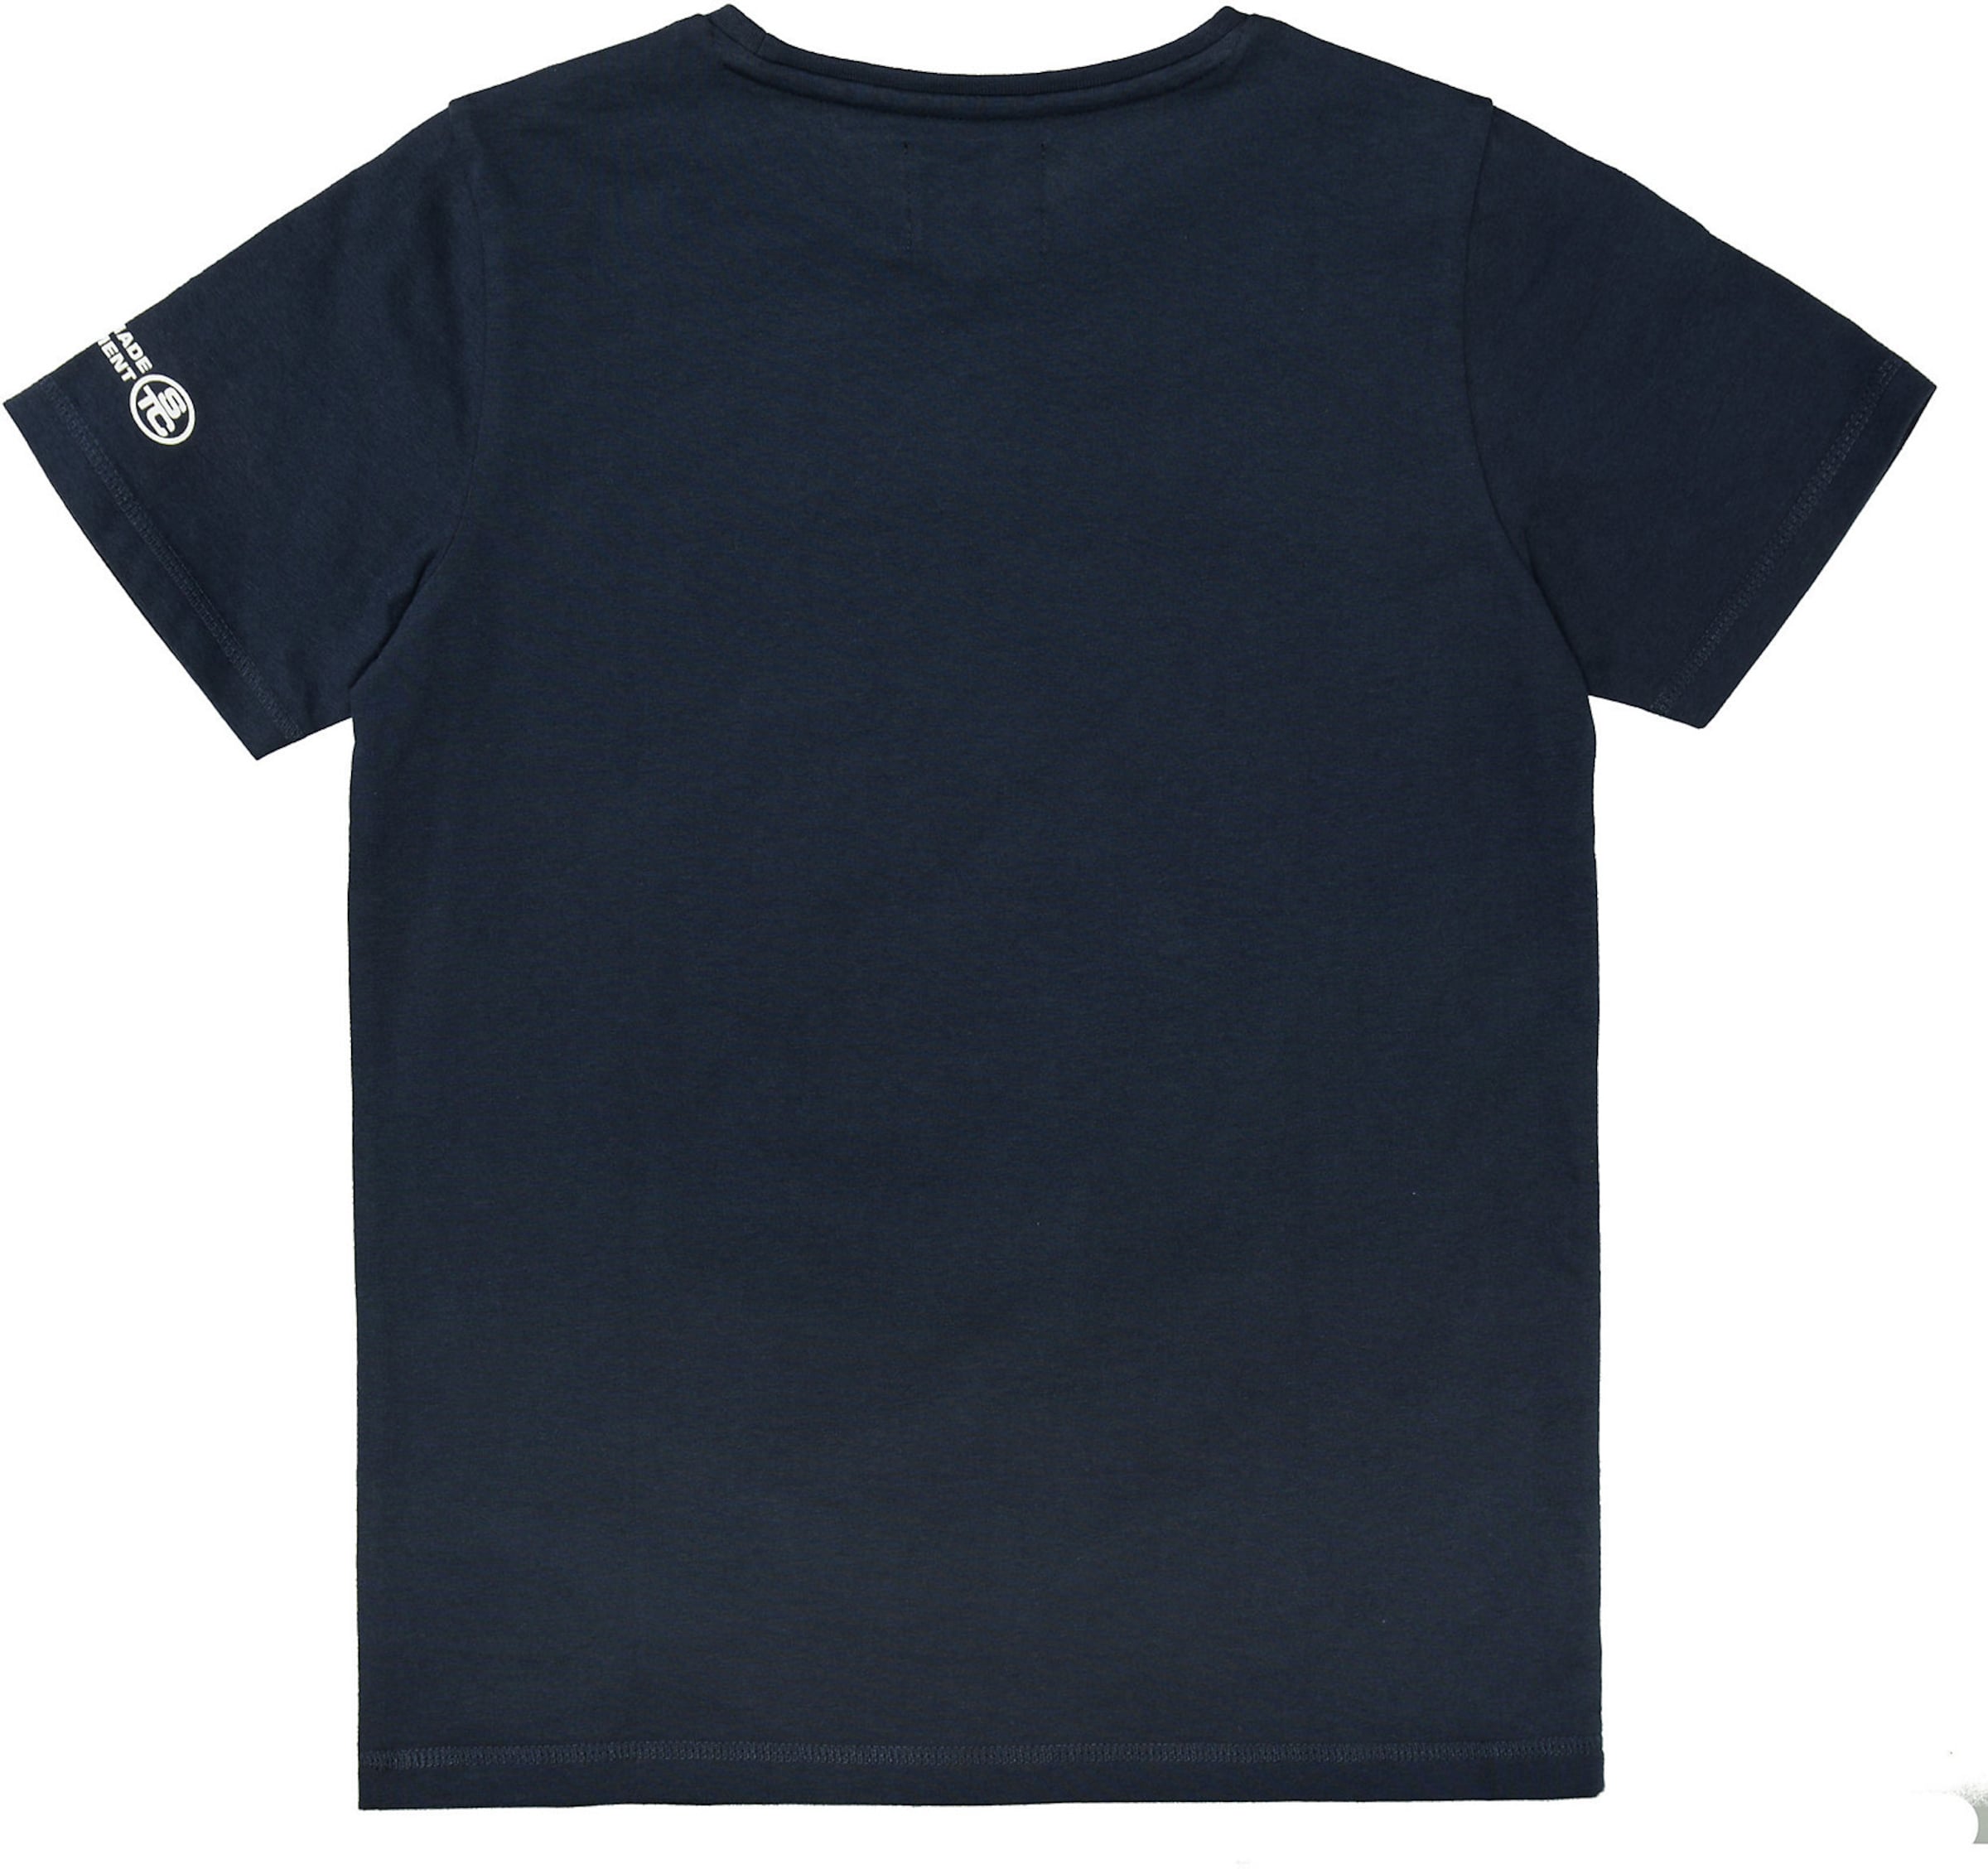 Kinder Teens (Gr. 140-176) STACCATO T-Shirt in Blau - AW57649